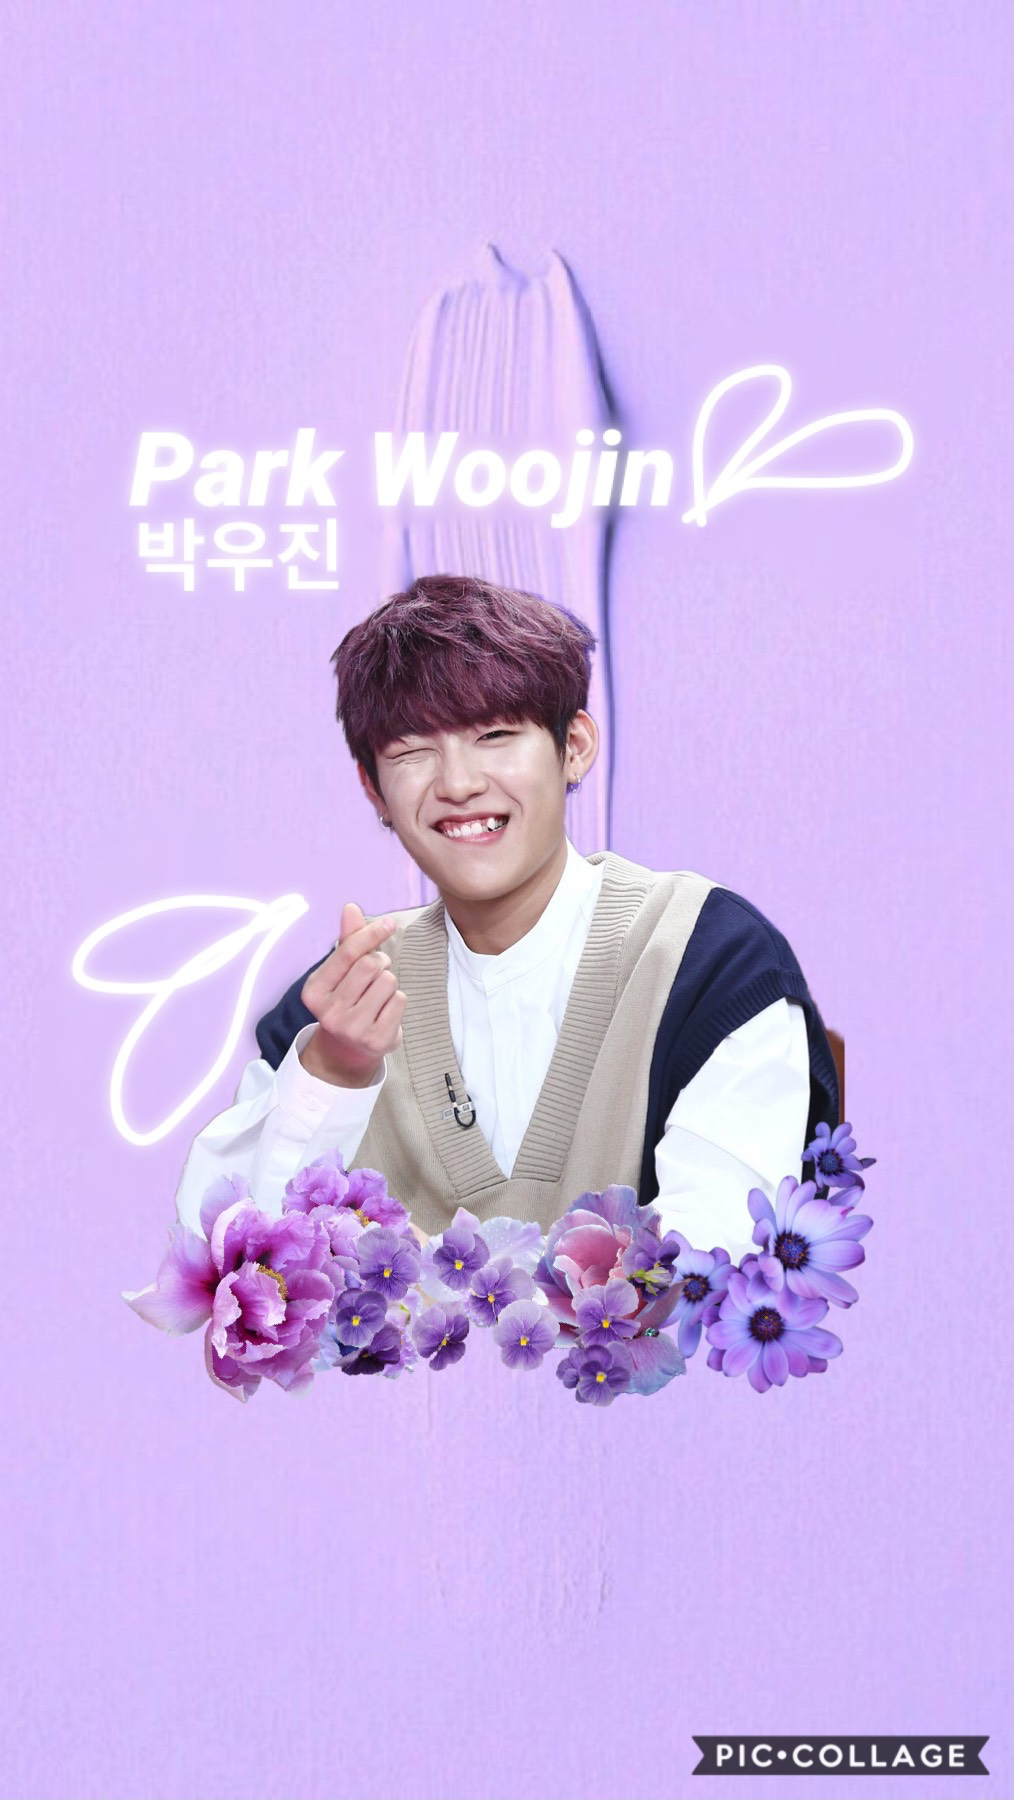 ✨TAP✨
Park Woojin 💕🌸
Q: What should I add on my blog? 